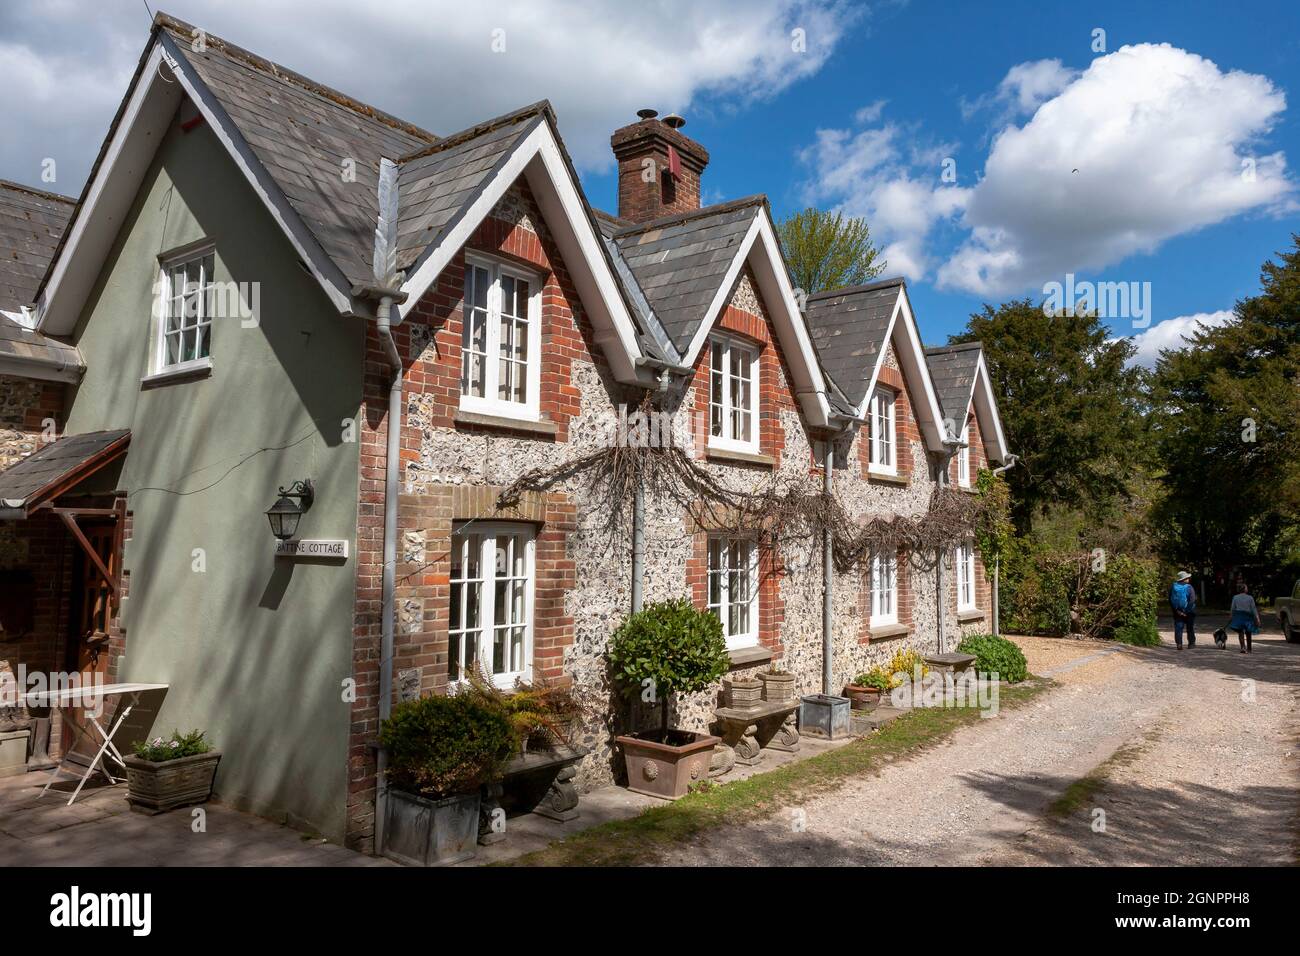 Brick and flint cottages, East Marden, West Sussex, UK Stock Photo